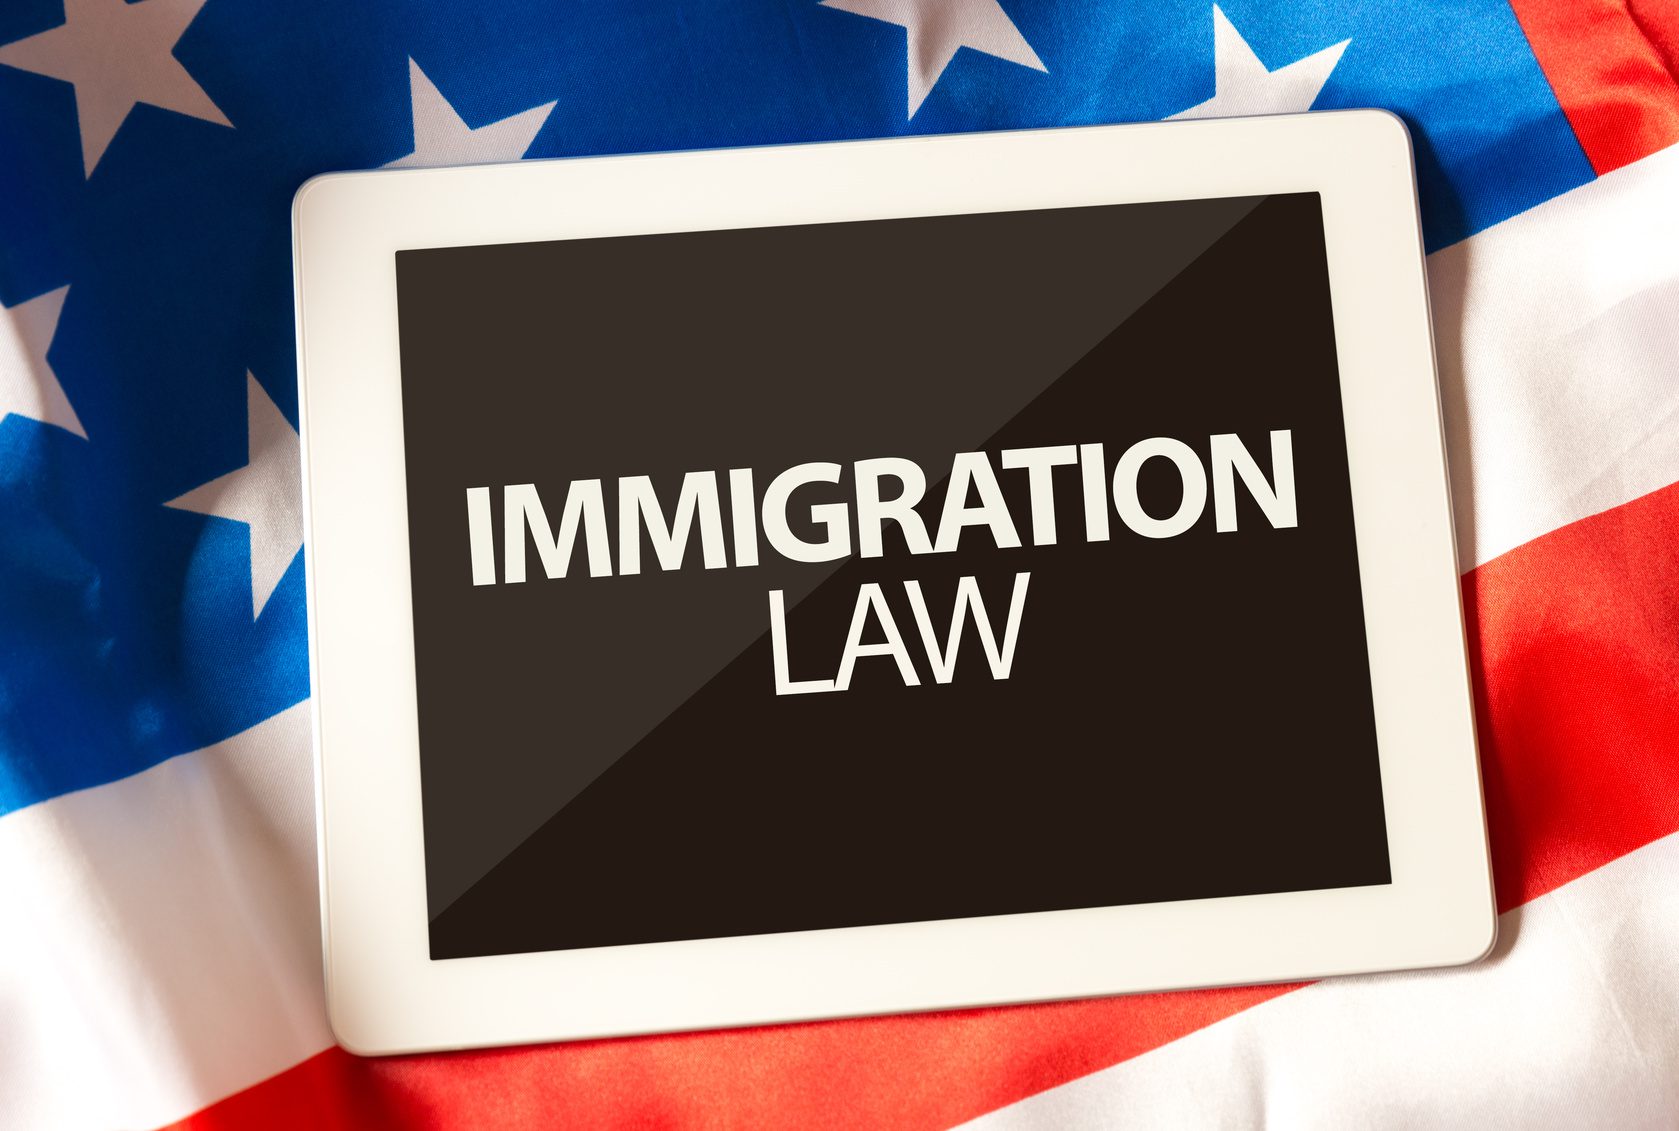 BREAKING NEWS: USCIS Publishes New Waiver Filing Rules